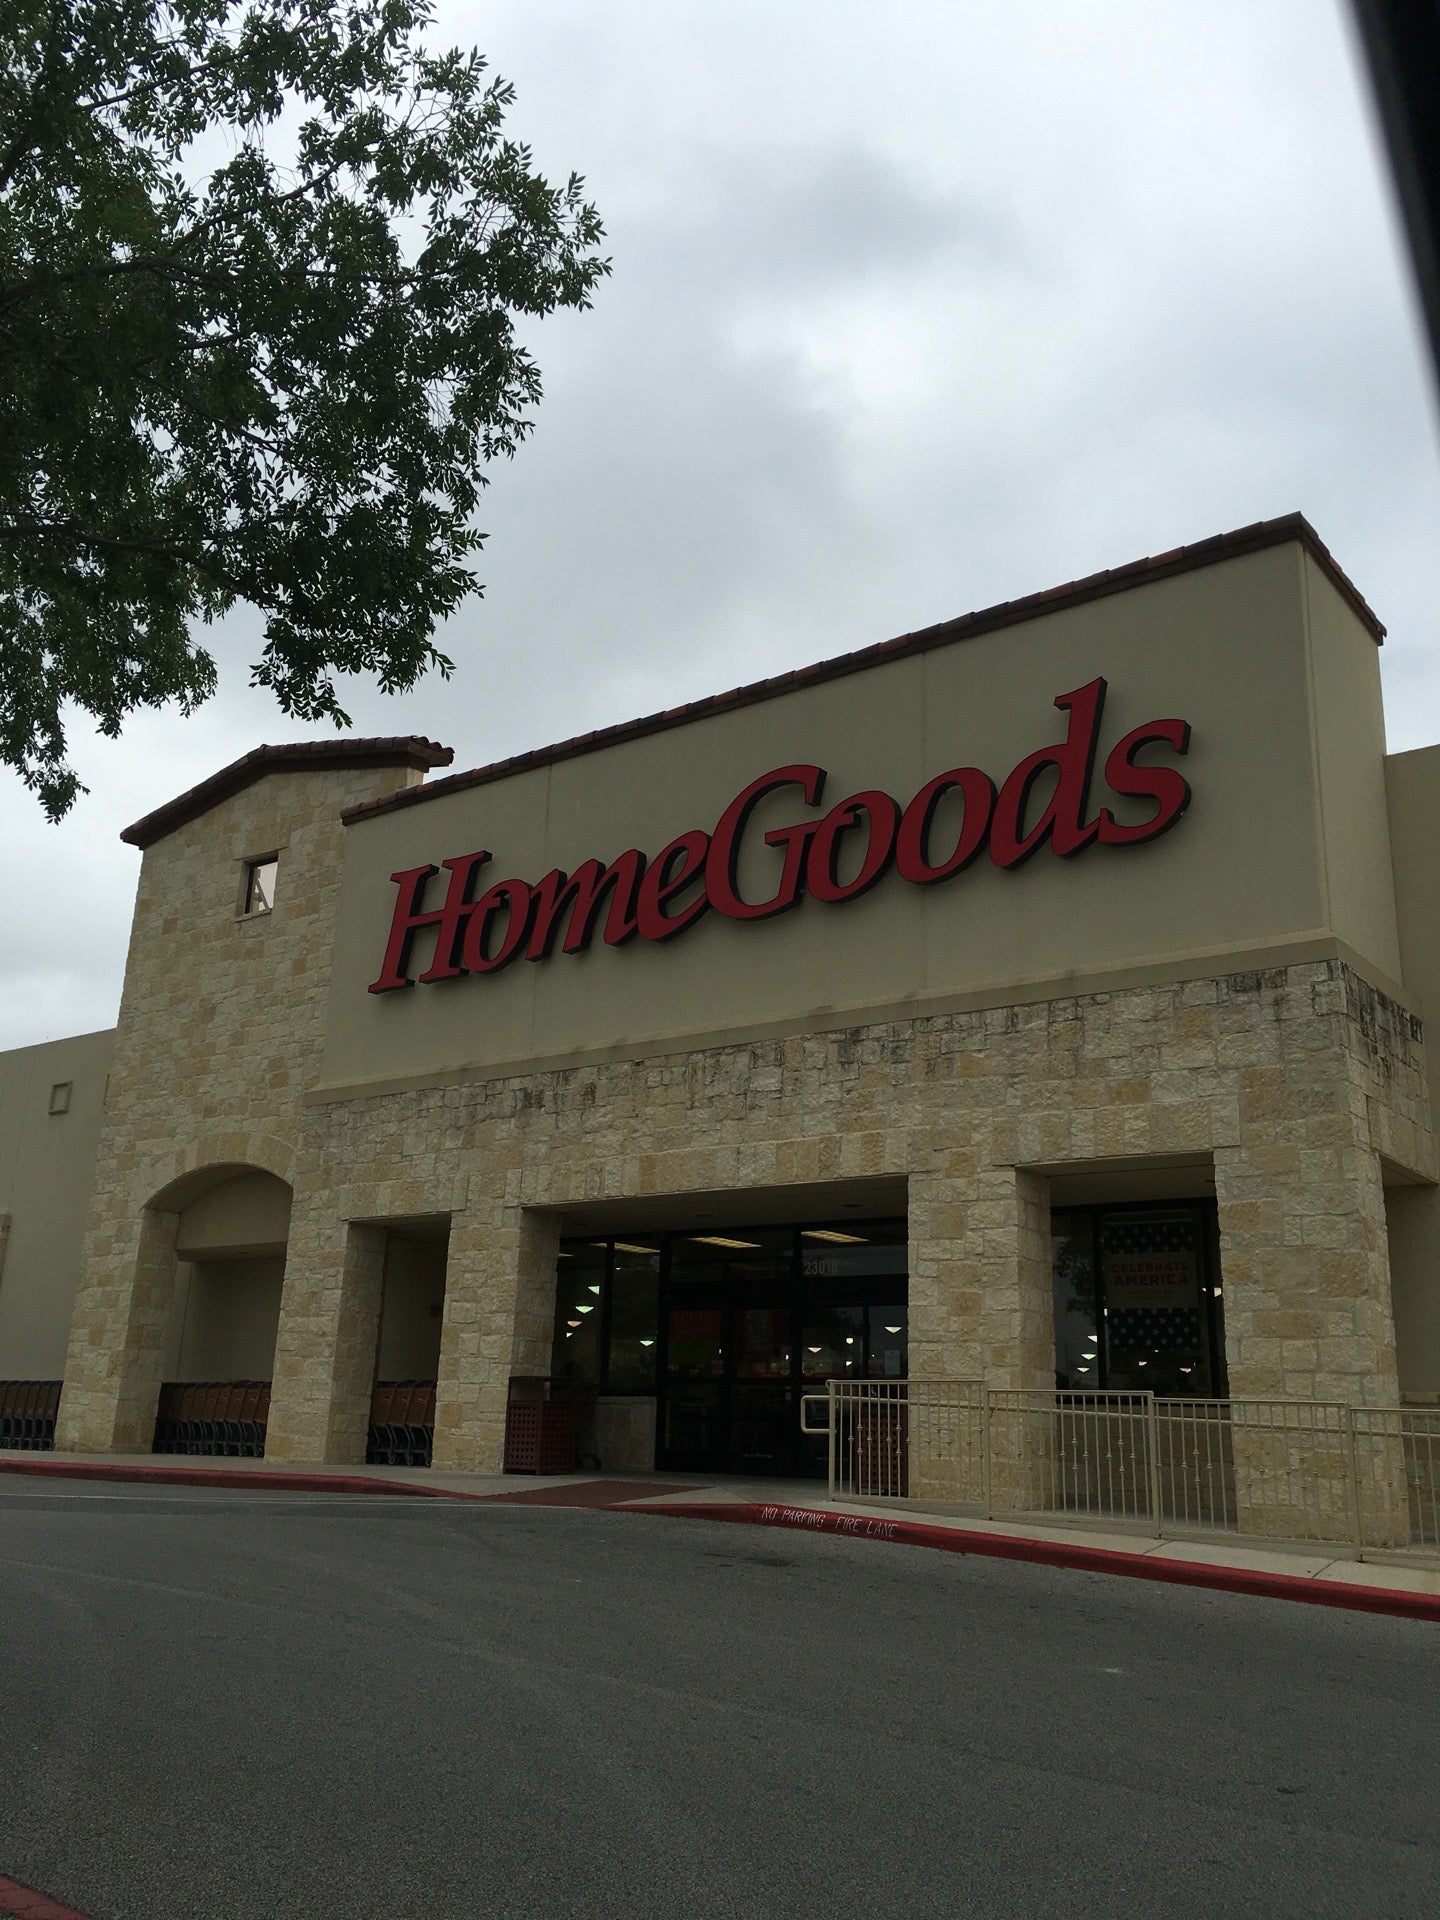 HOME GOODS - Home Decor in San Antonio, Texas at 23018 US Hwy 281 N - 47  Photos & 23 Reviews - Phone Number - Yelp